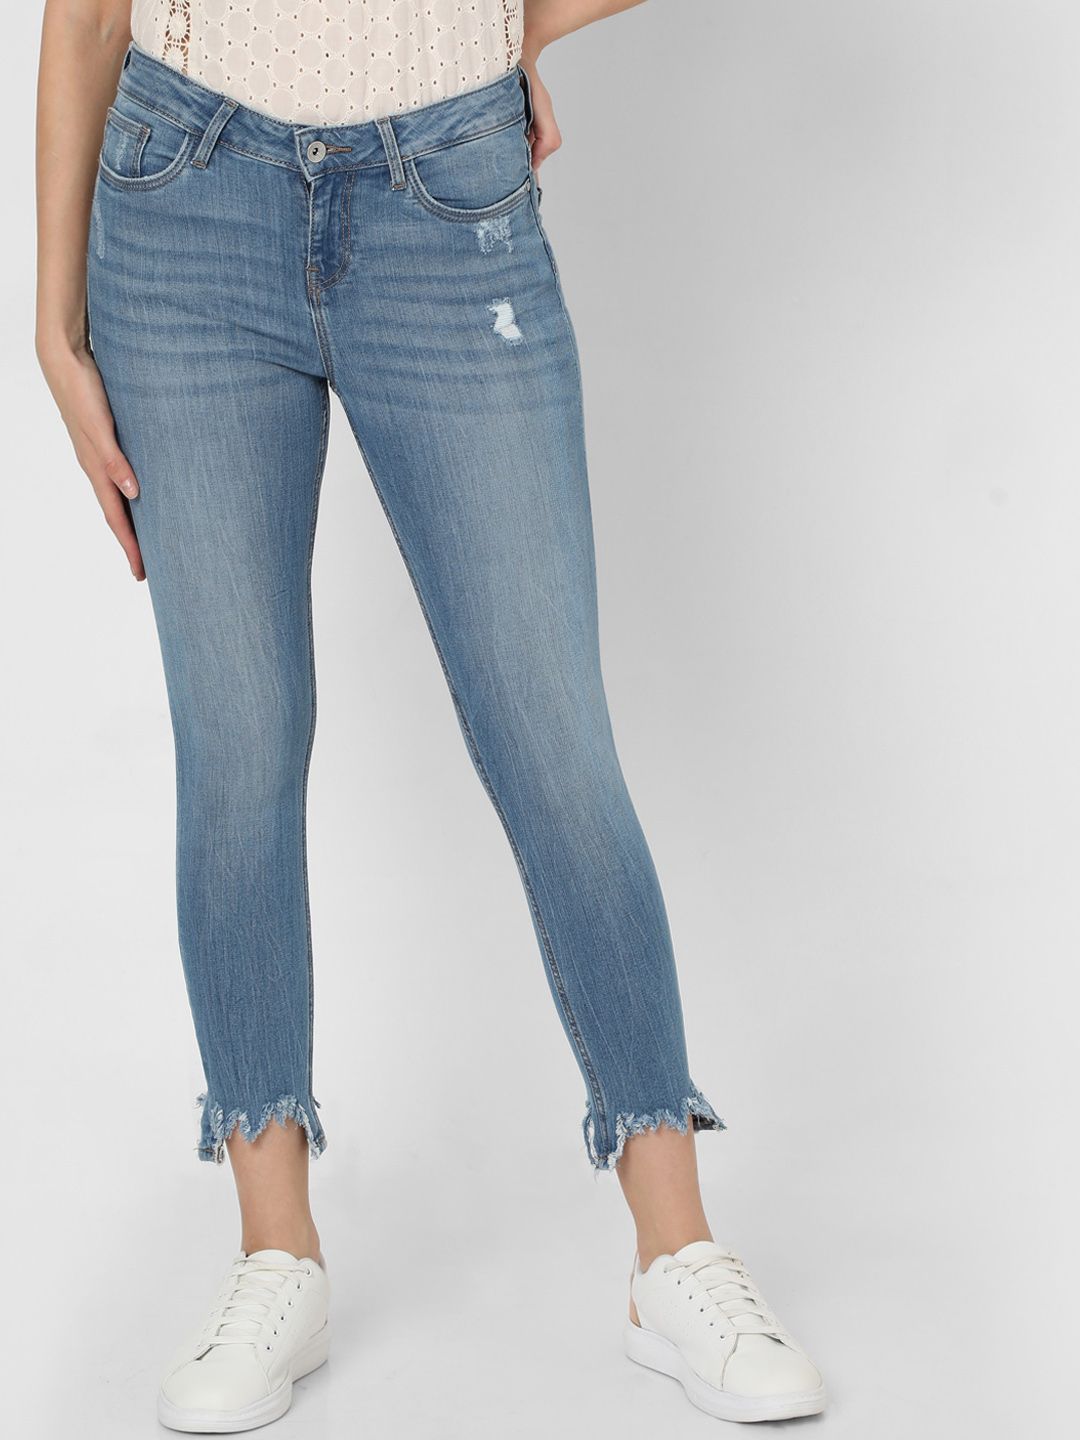 Vero Moda Women Blue Skinny Fit Low Distress Light Fade Stretchable Jeans Price in India